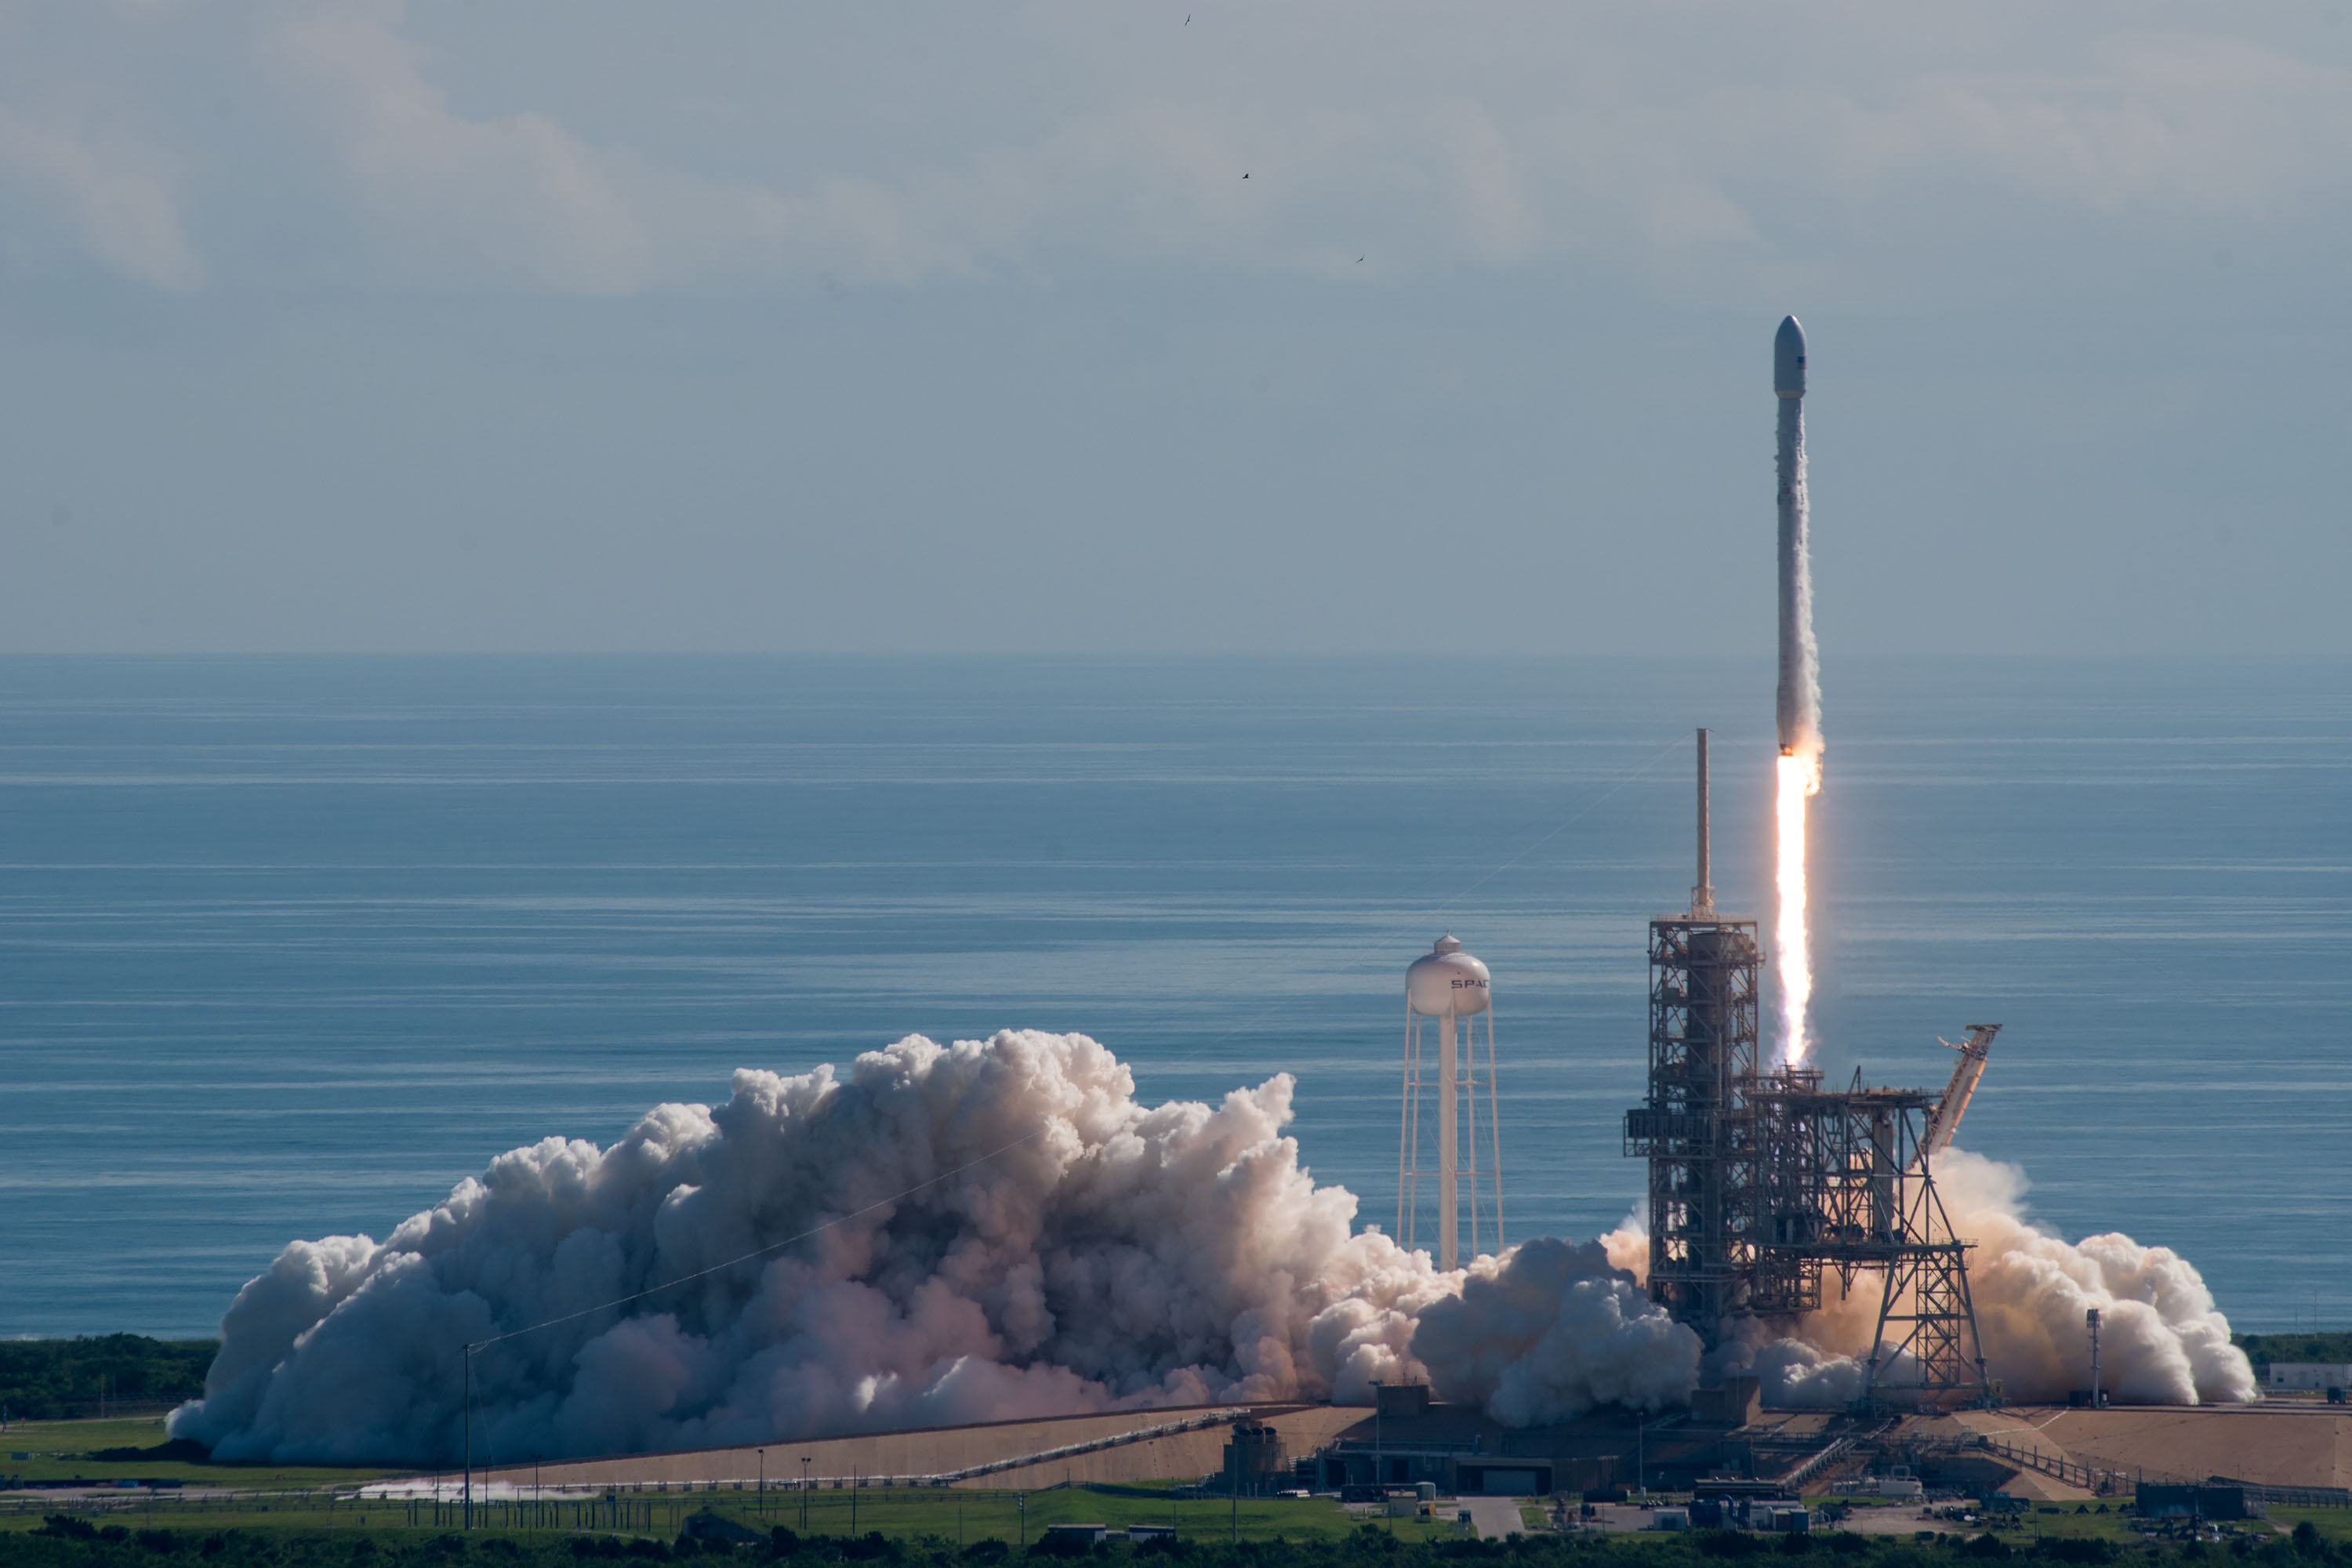 Photos: Falcon 9 Lifts Off from Florida with X-37B Space Plane – X-37B – OTV-5 ...